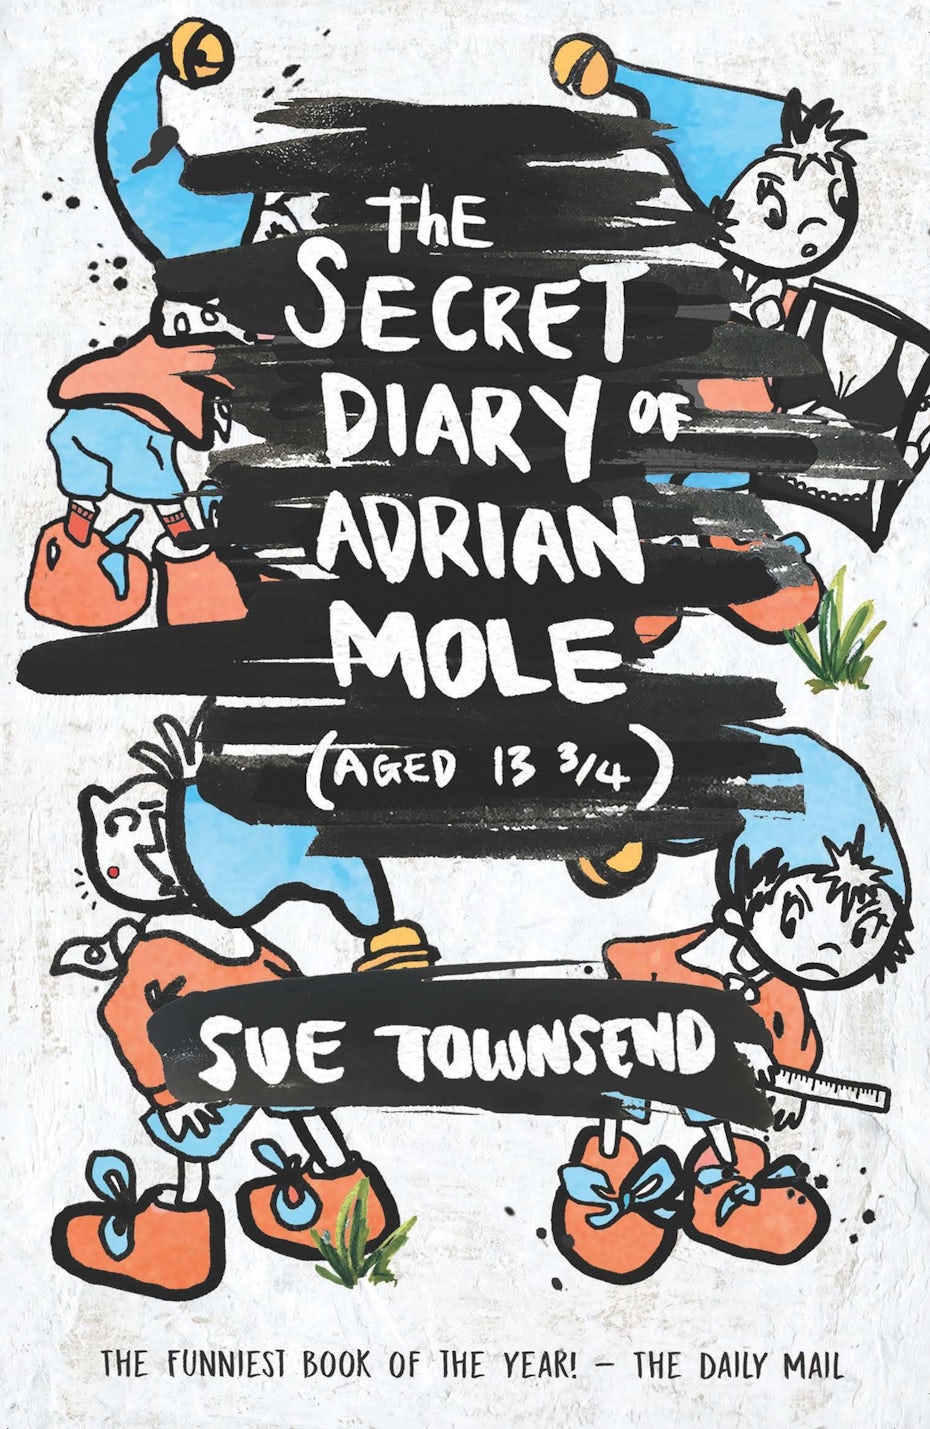 book cover design for The Secret Diary of Adrian Mole (aged 13 ¾) by Sue Townsend